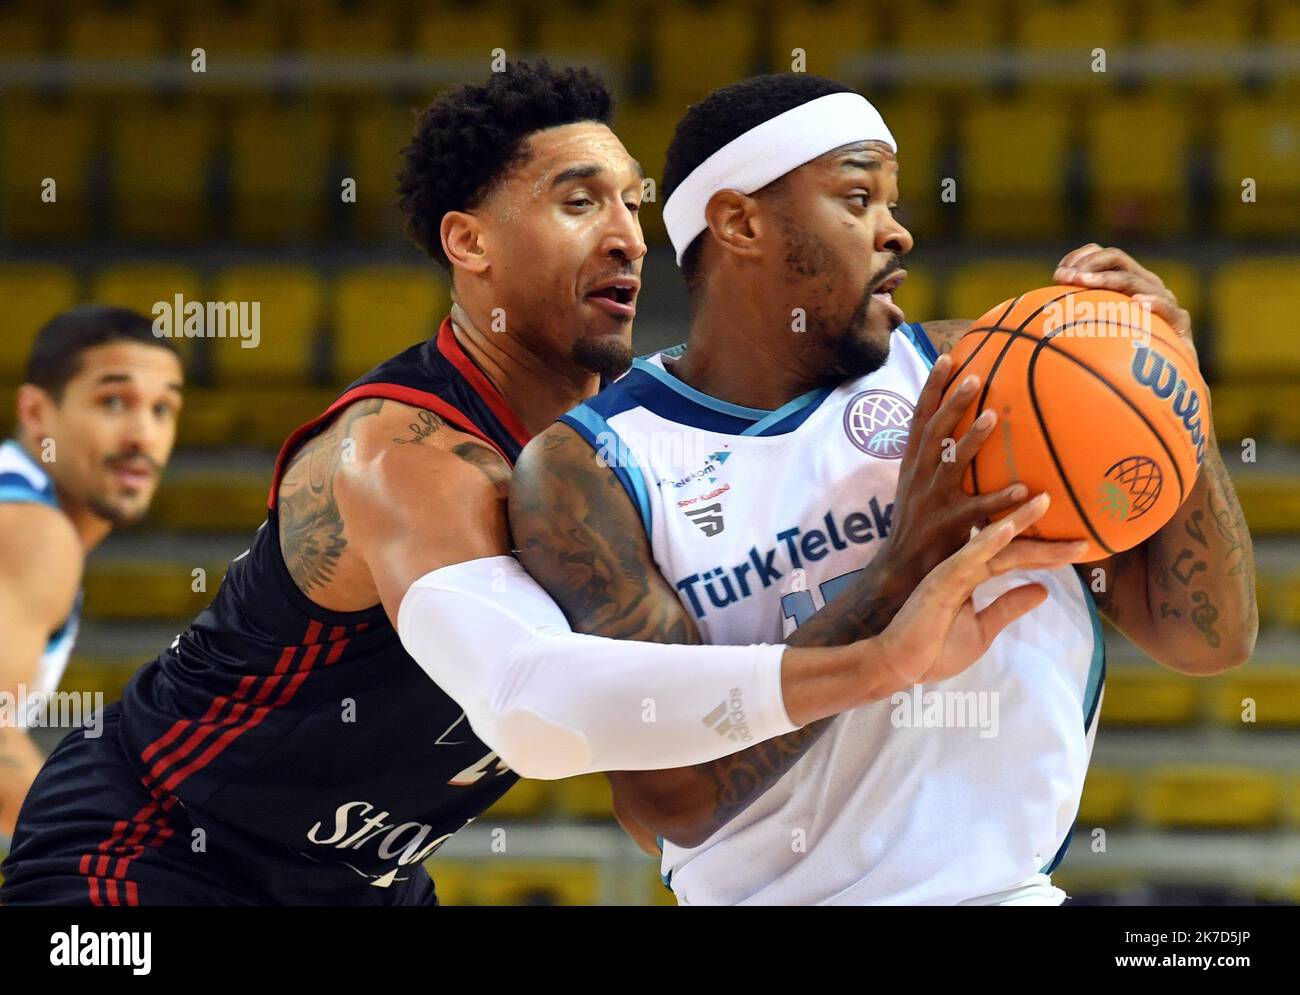 PHOTOPQR/DNA/Laurent REA ; Strasbourg ; 07/04/2021 ; BASKET-BALL : Ligue  des Champions : SIG (Ishmail Wainright) - Ankara (Marcus Foster) Champions  League Stock Photo - Alamy